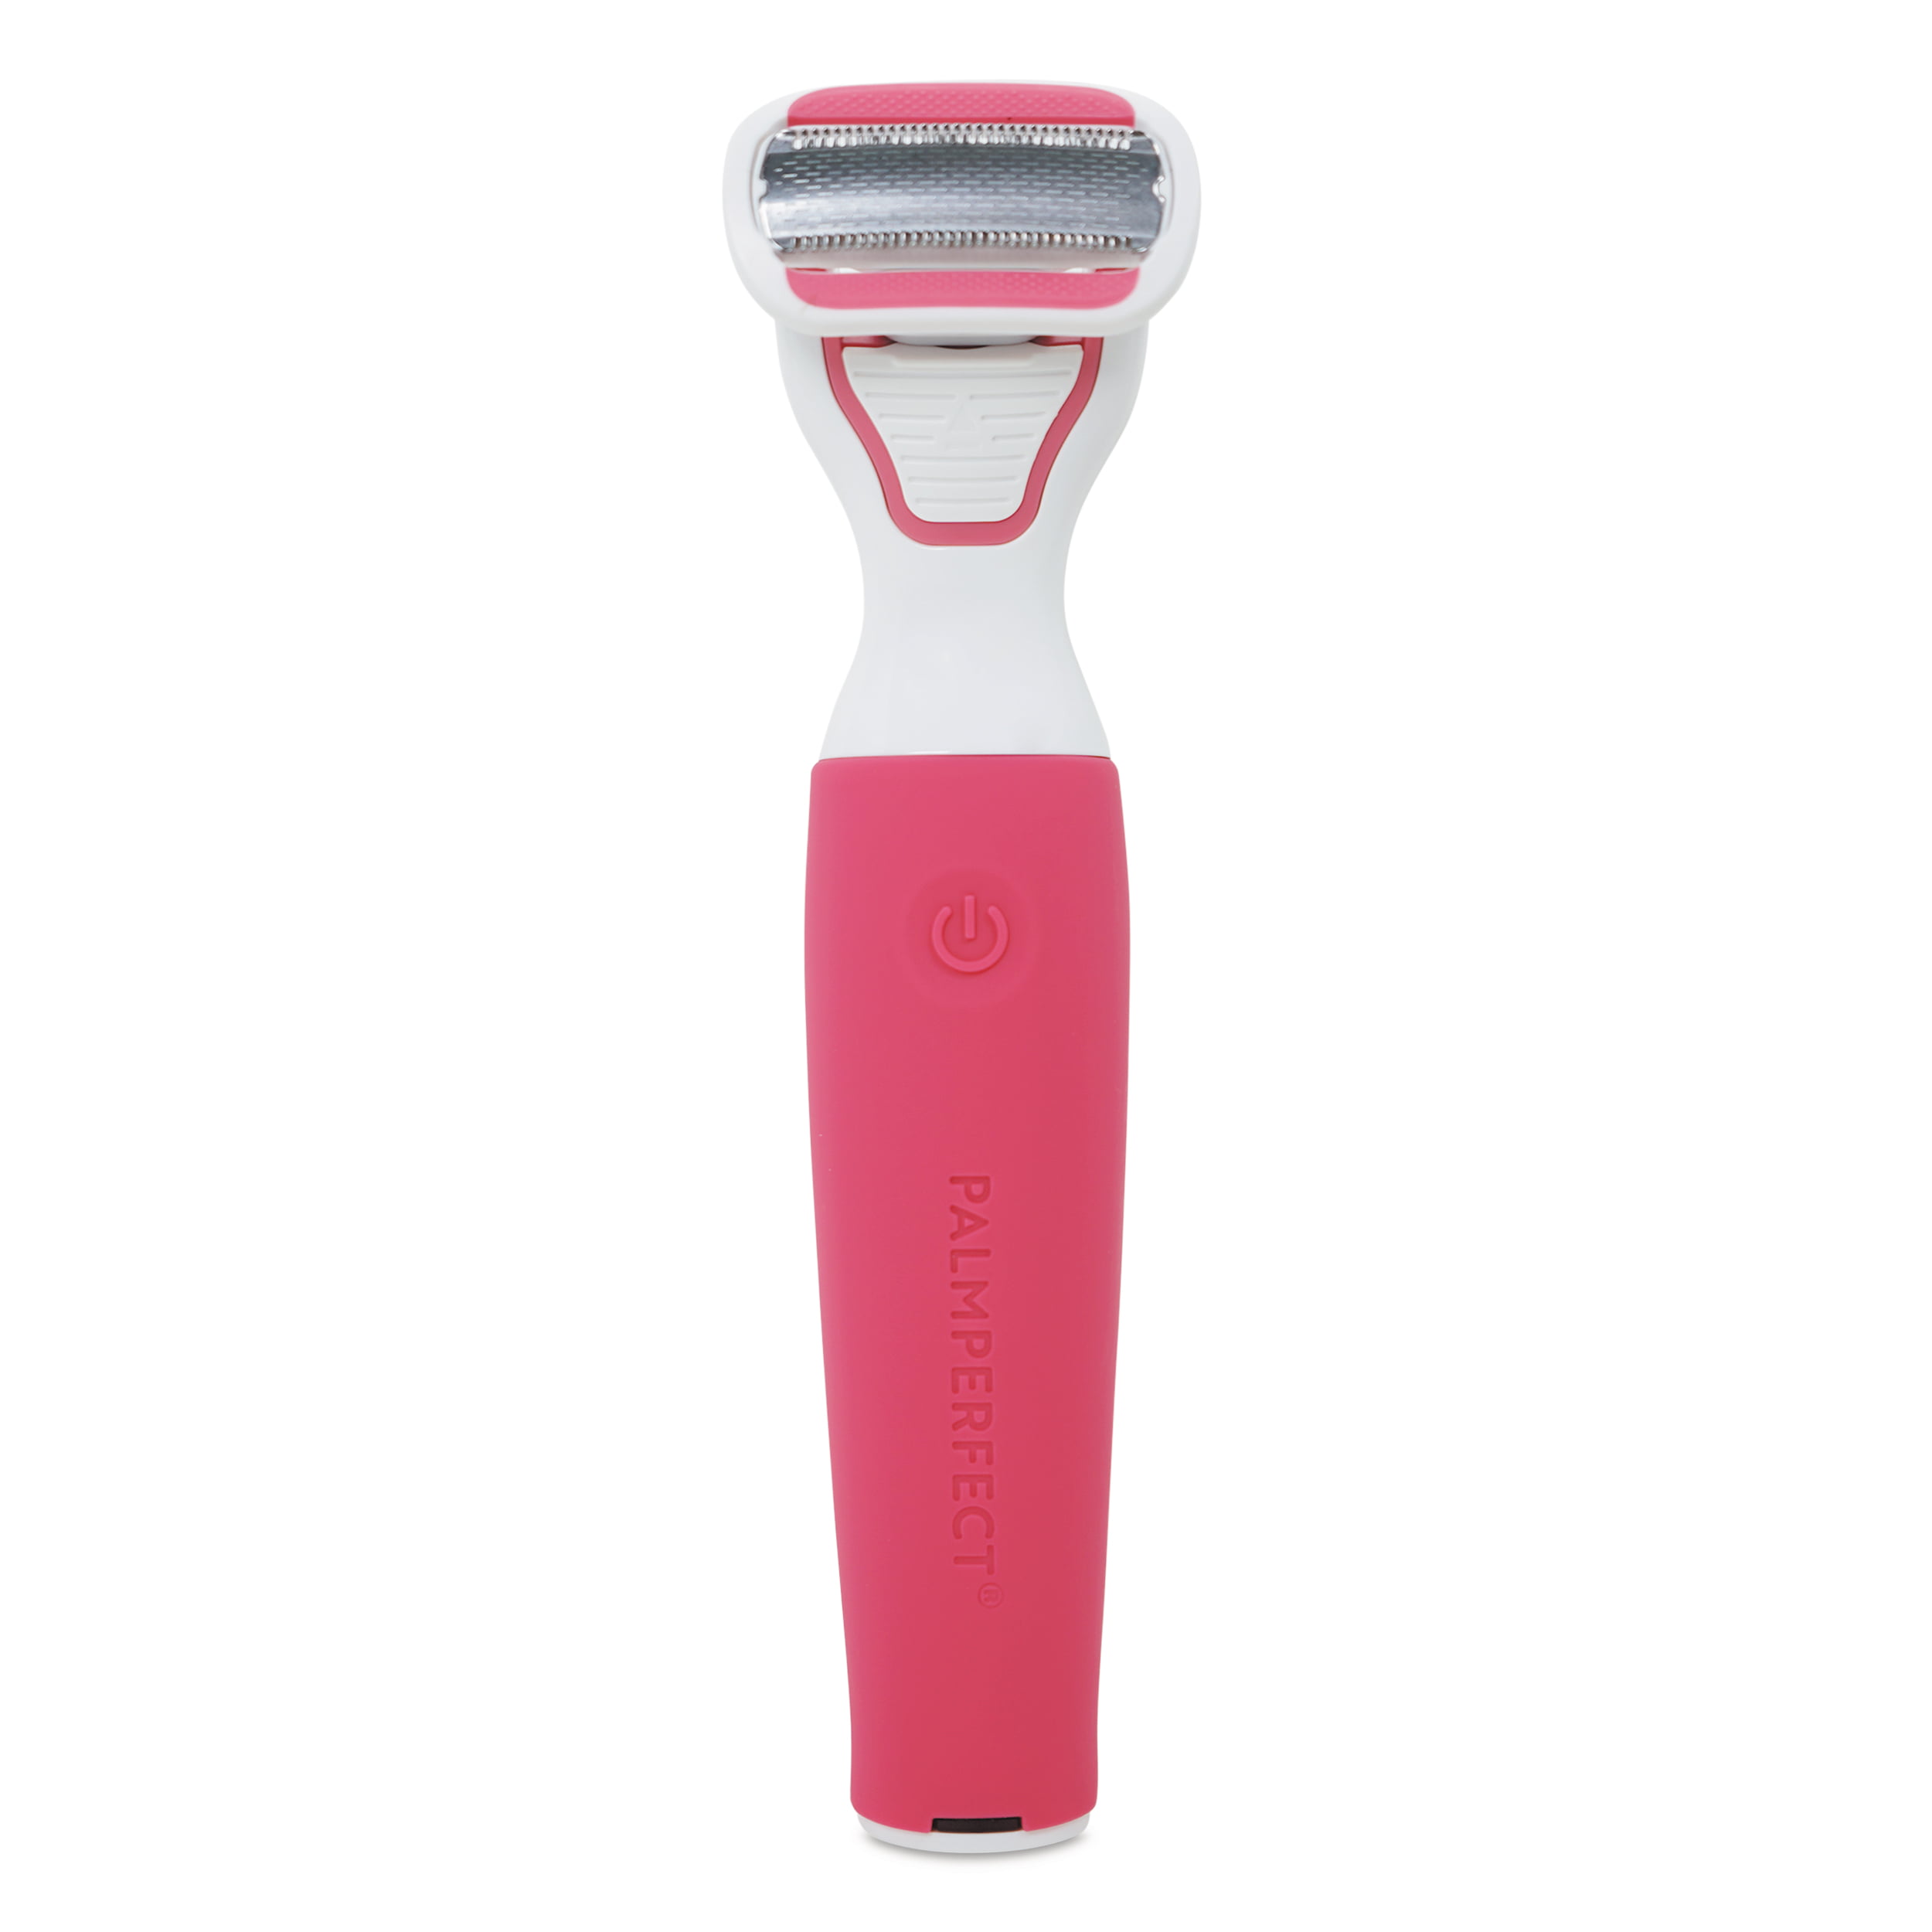 palmperfect full body groomer, Female Electric Shaver, Pink